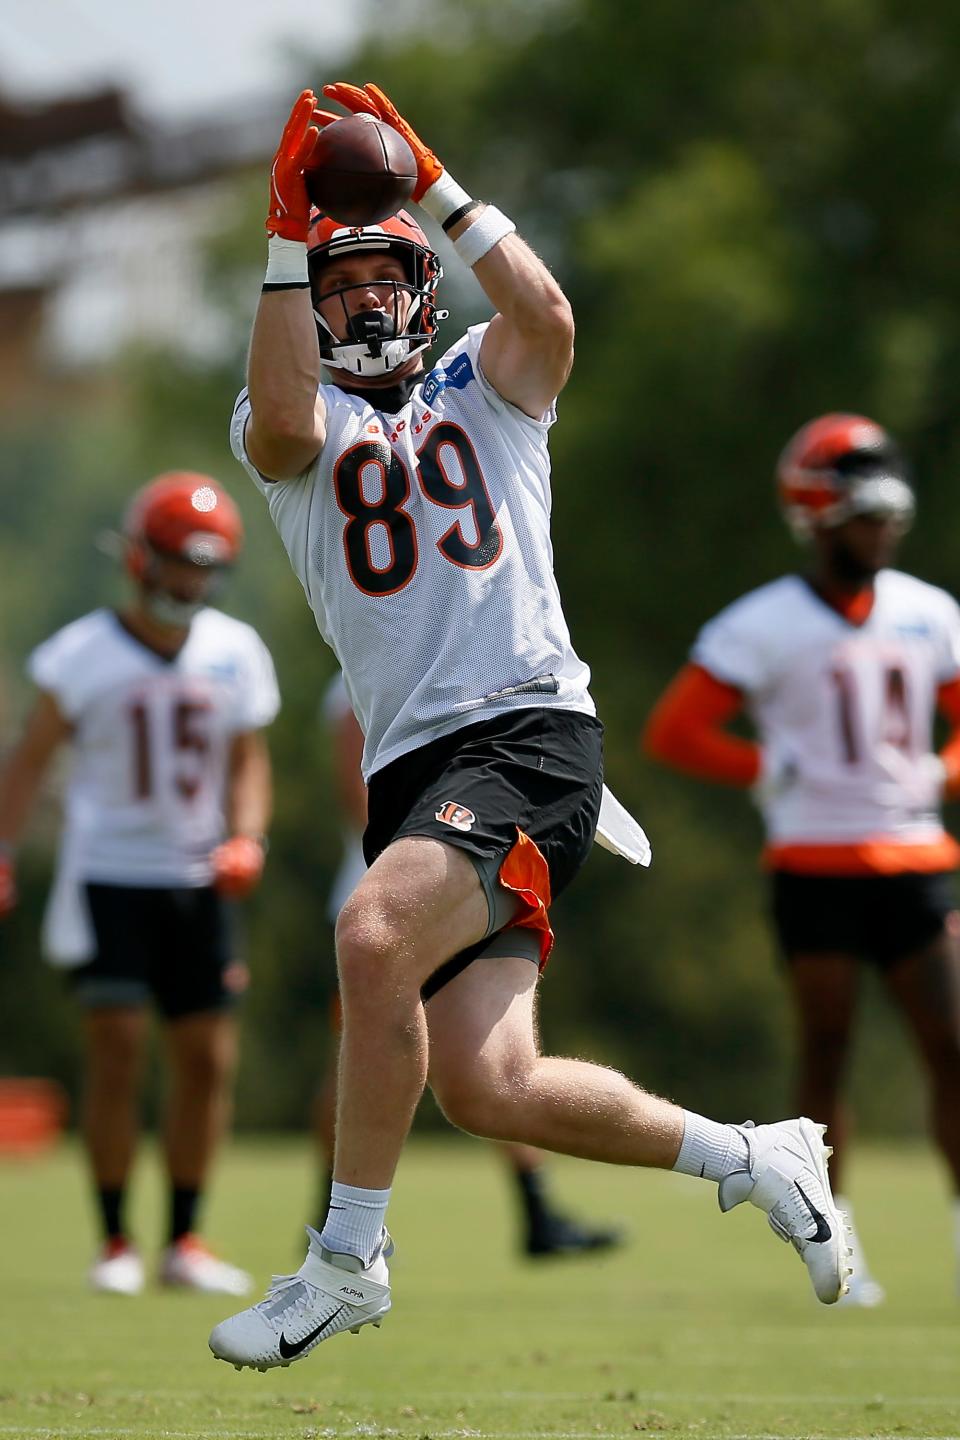 Bengals tight end Drew Sample was injured Thursday in practice, but is expected to return in a few weeks. Sample is the Bengals' best blocking tight end.